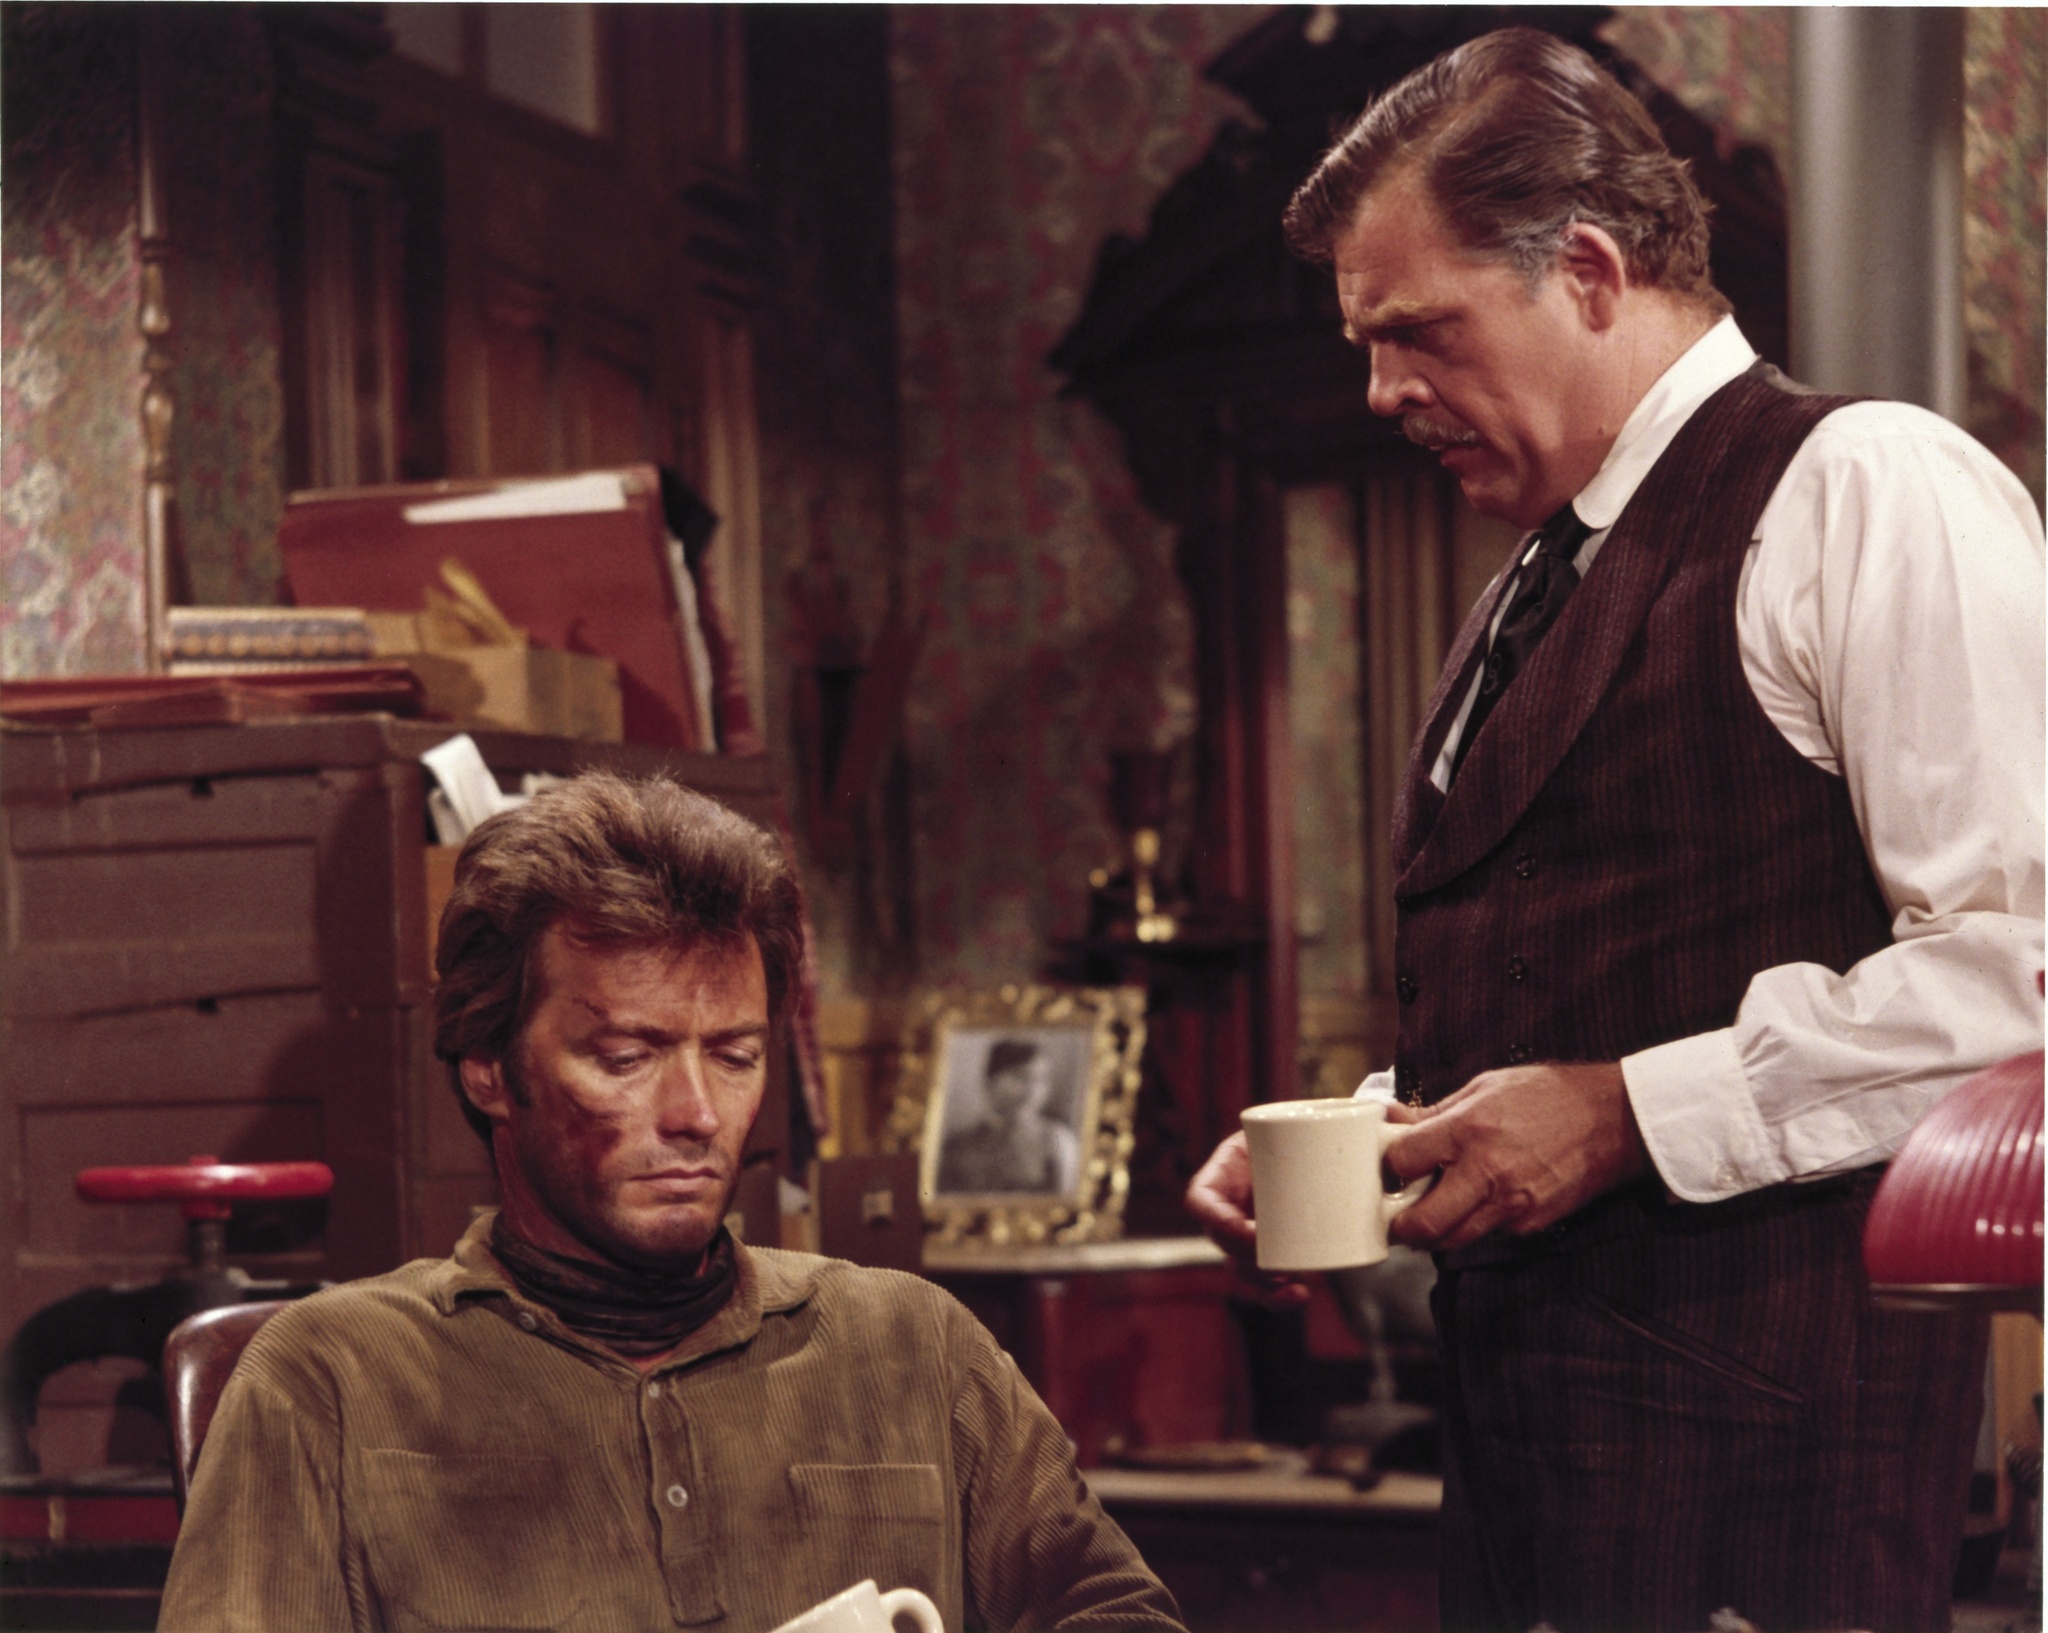 Still of Clint Eastwood and Pat Hingle in Hang 'Em High (1968)